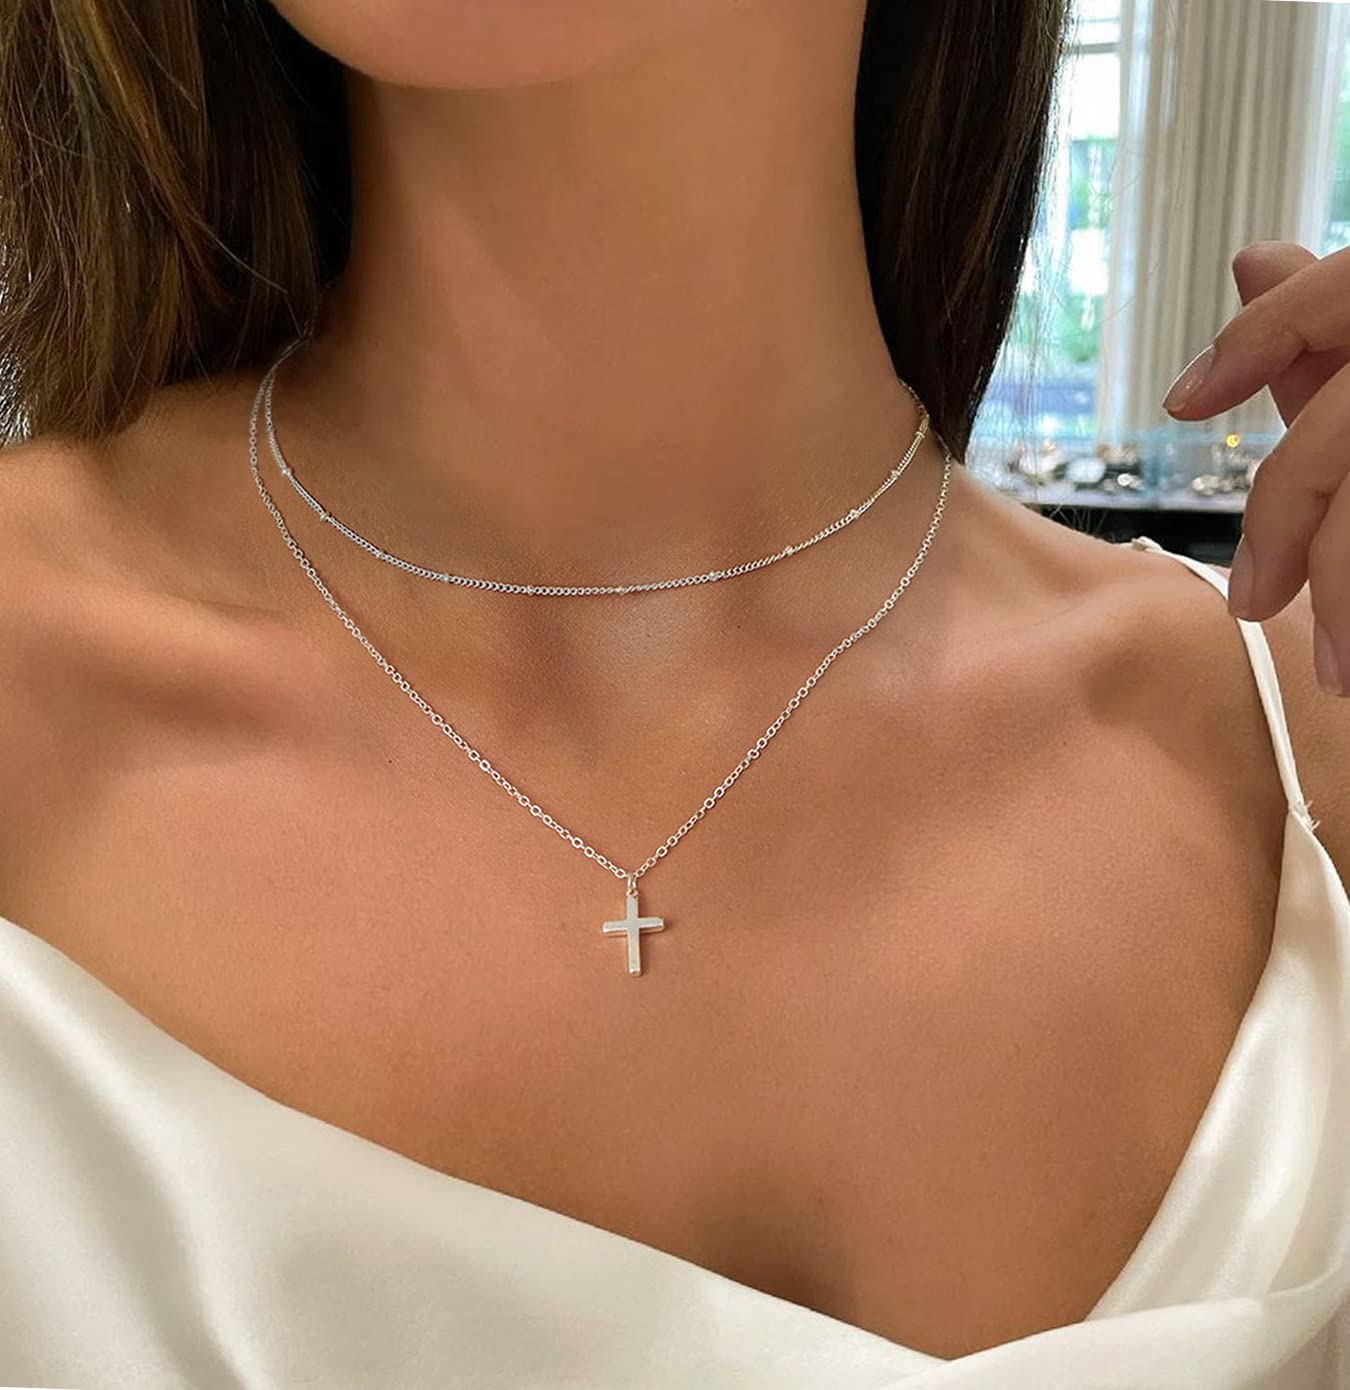 Gold Filled Crucifix Cross Necklace Women Girls Charm Pendant Necklaces  Catholic Christian Jewelry Girls Confirmation Gift - Etsy